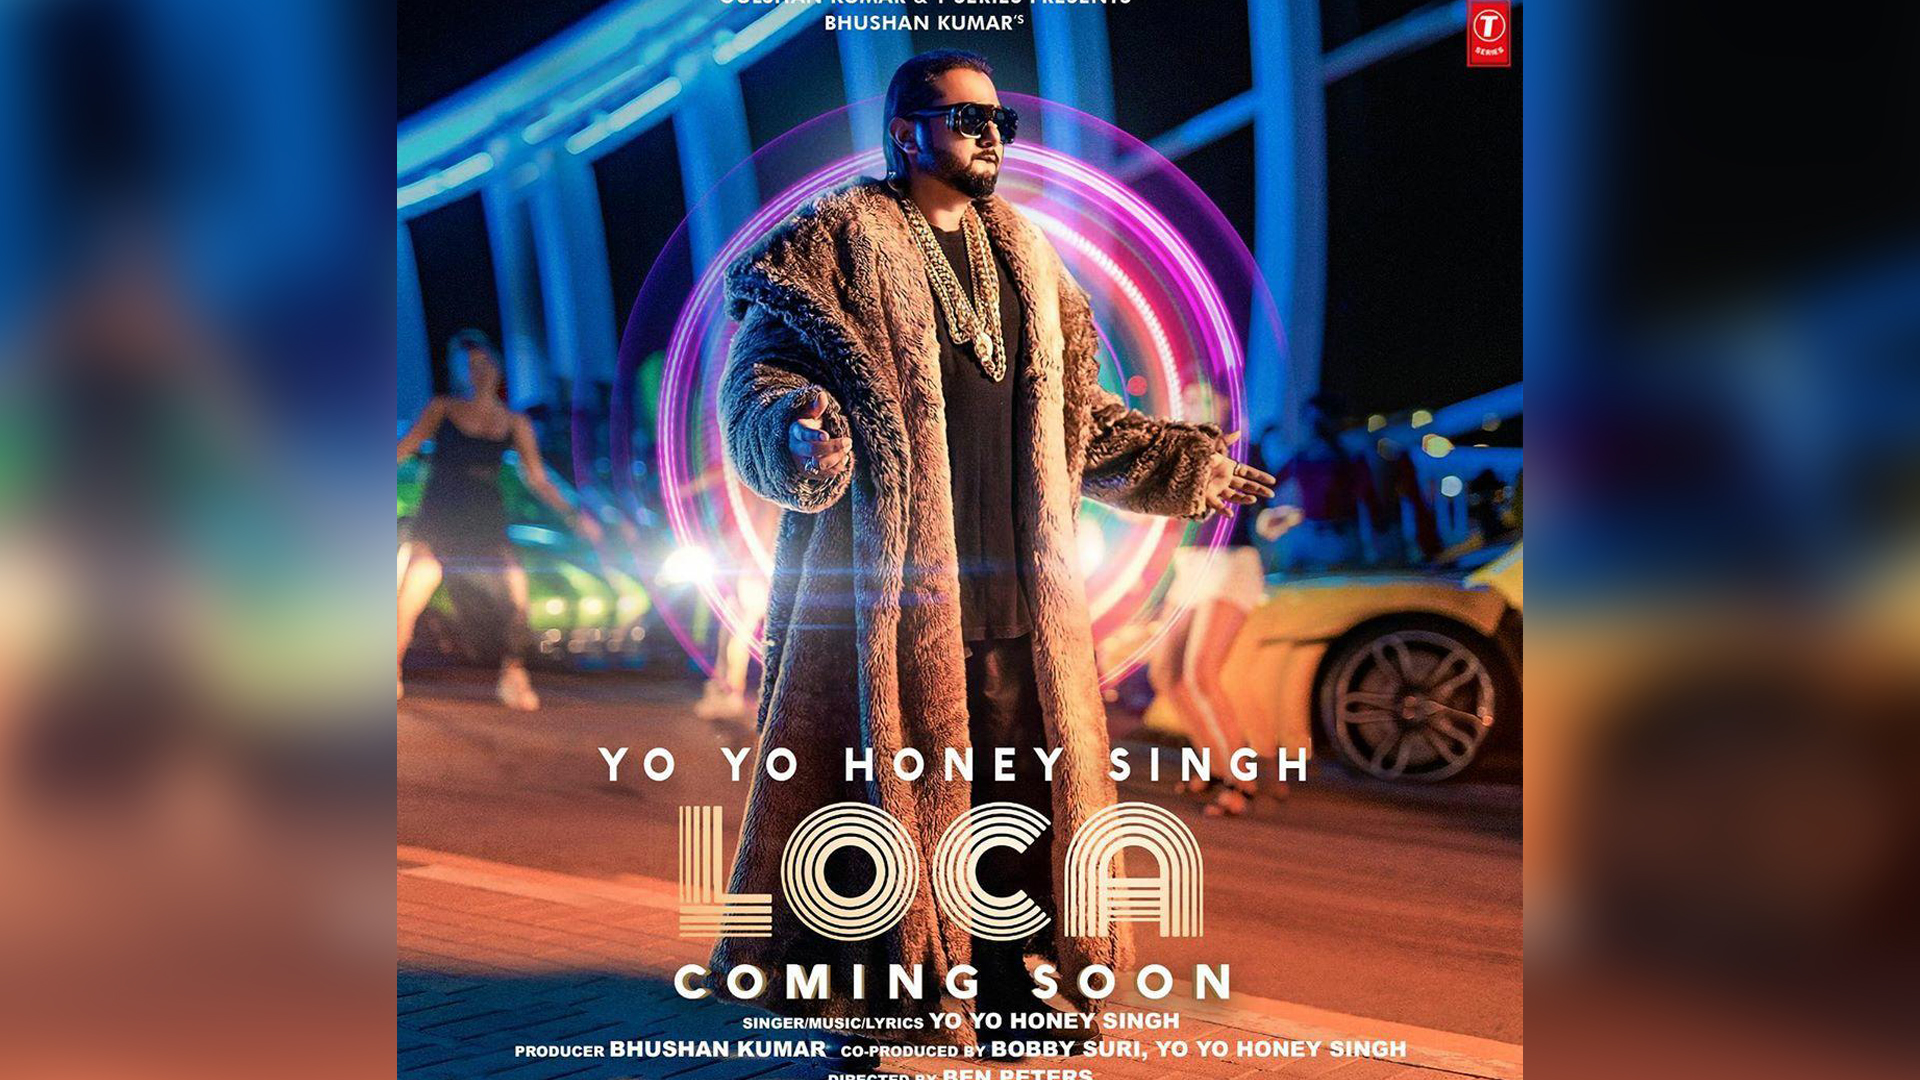 Announcement on its way! Yo Yo Honey Singh personally shares ‘Loca’ coming in two weeks and we’re thrilled!